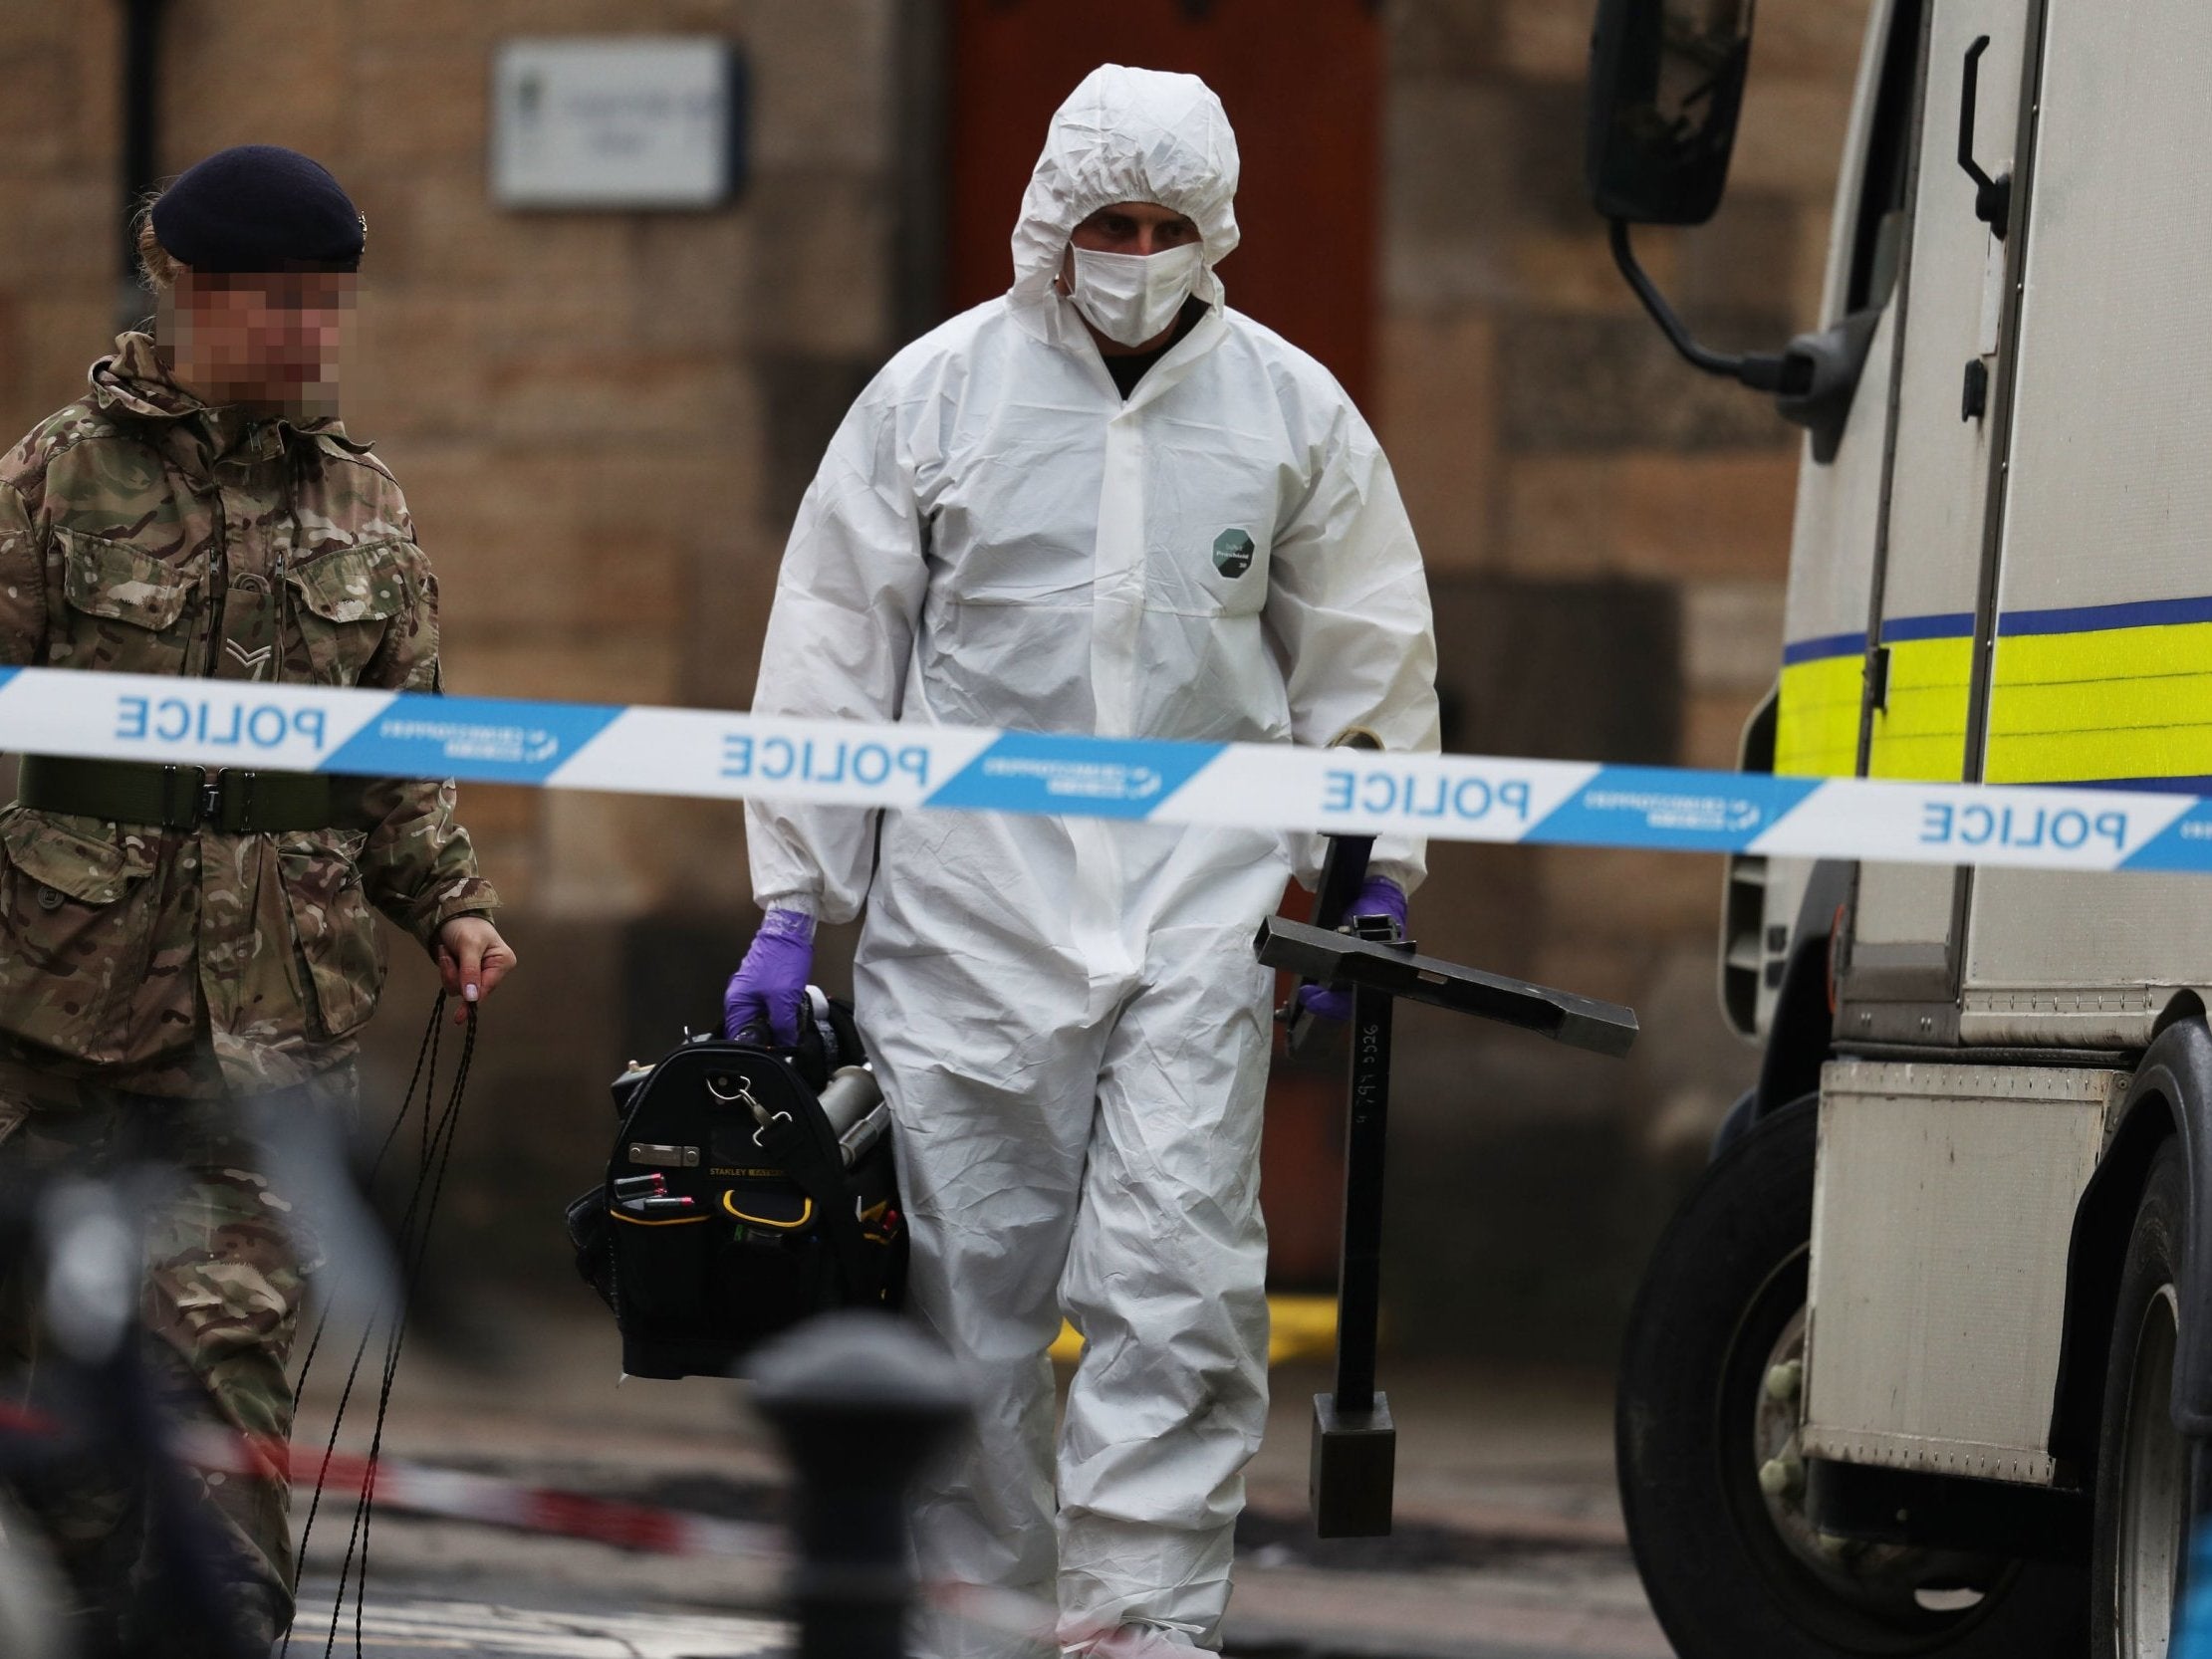 Bomb disposal personnel outside the University of Glasgow